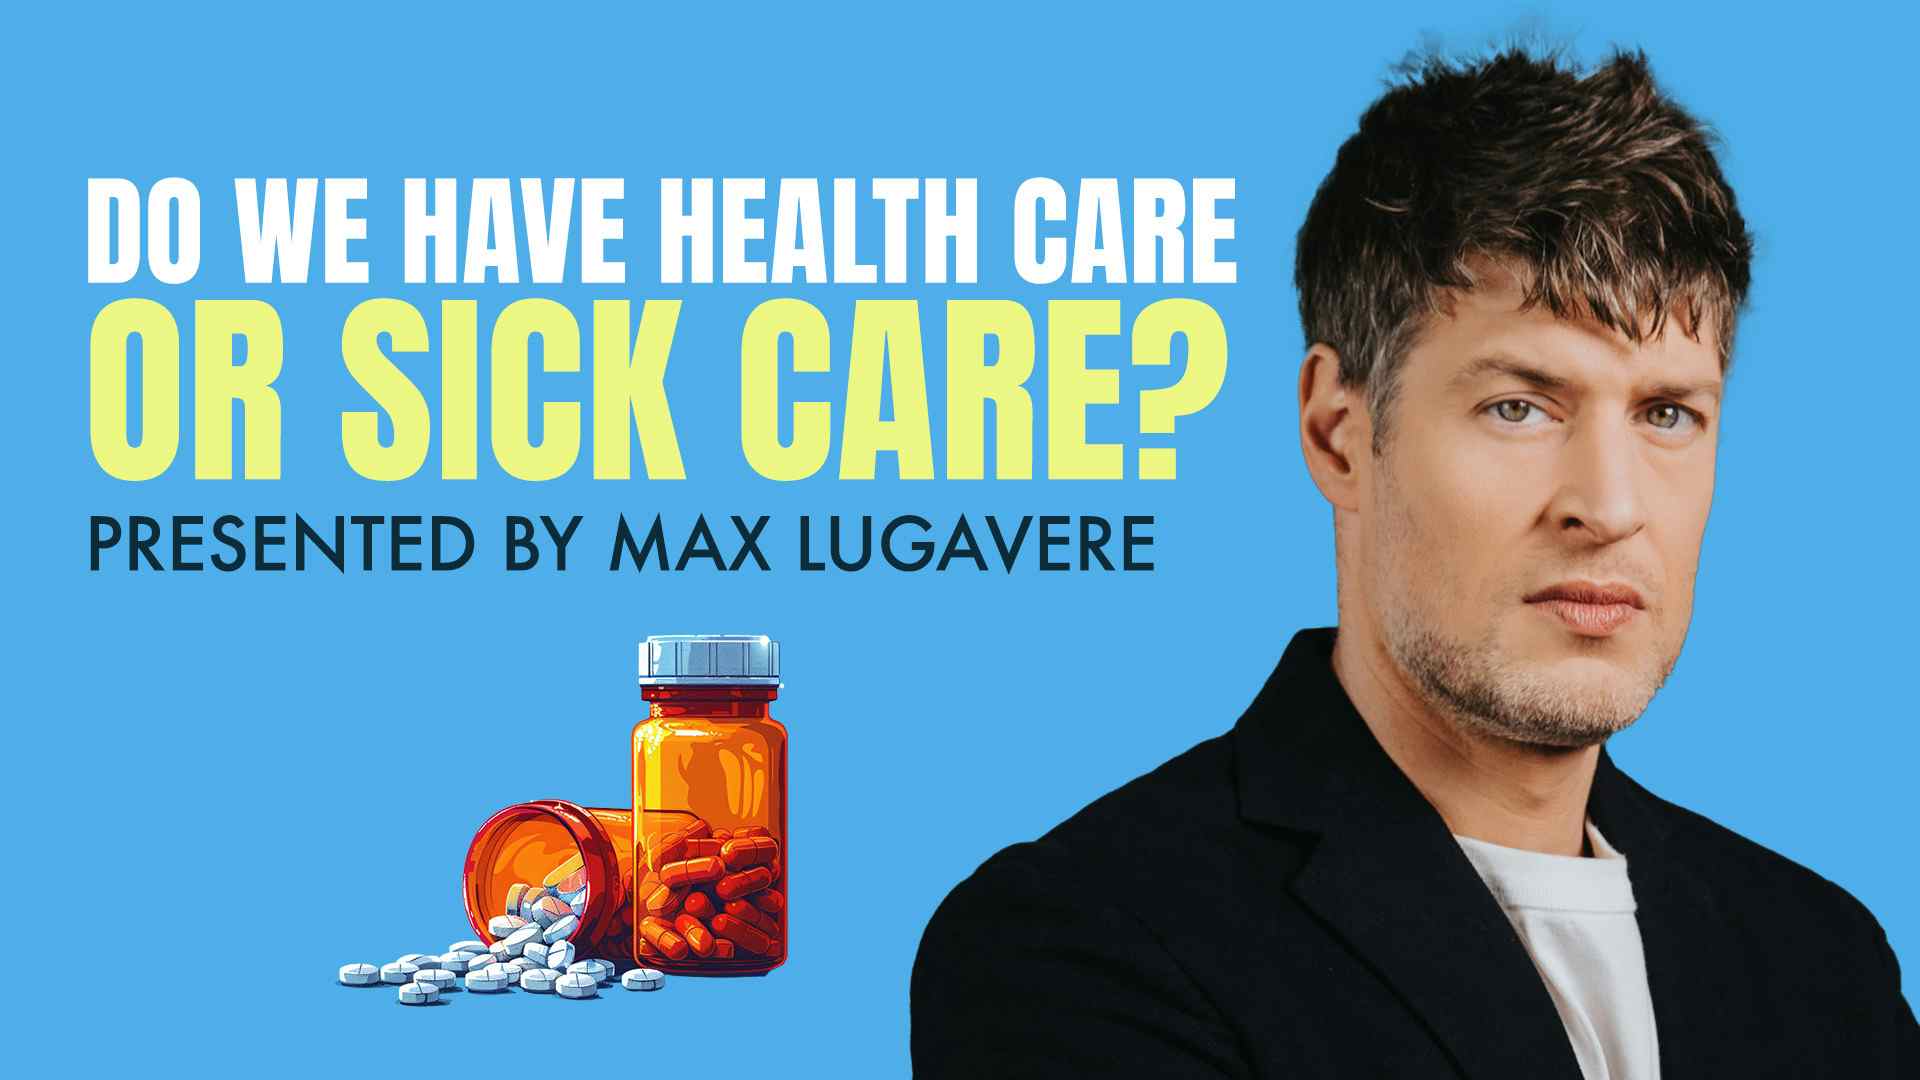 Do We Have Health Care or Sick Care?